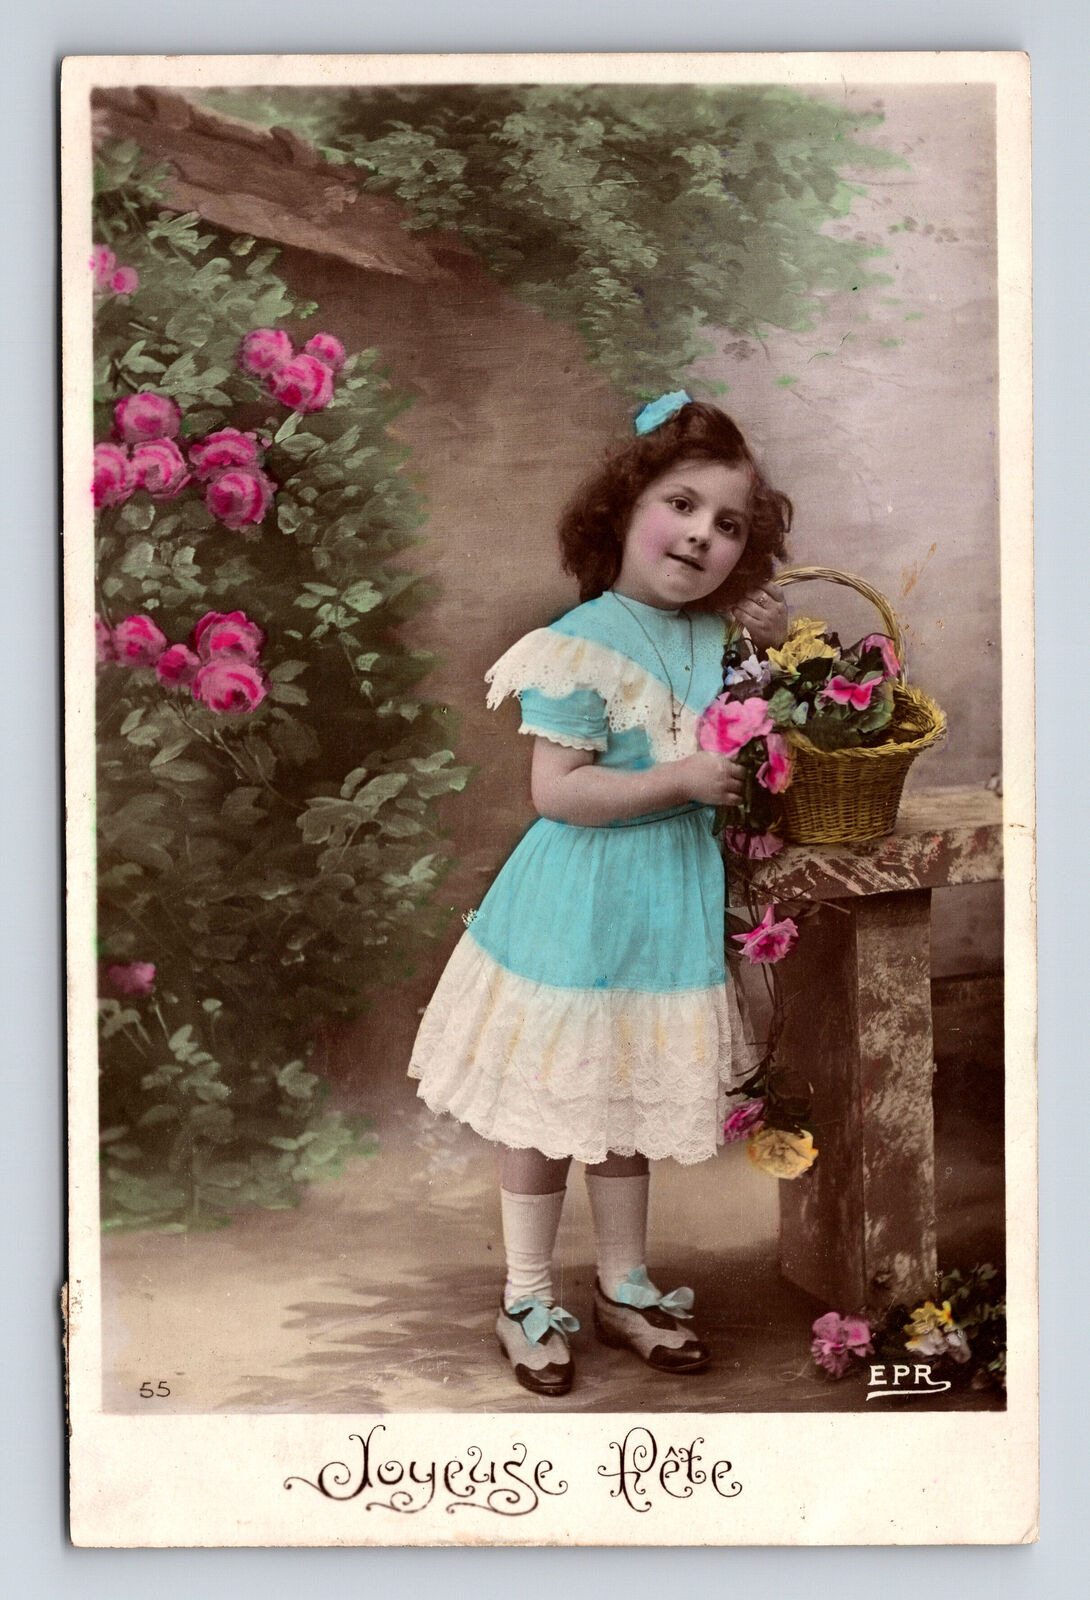 c1908 RPPC Young French Girl Flowers Hand Colored EPR Real Photo Postcard